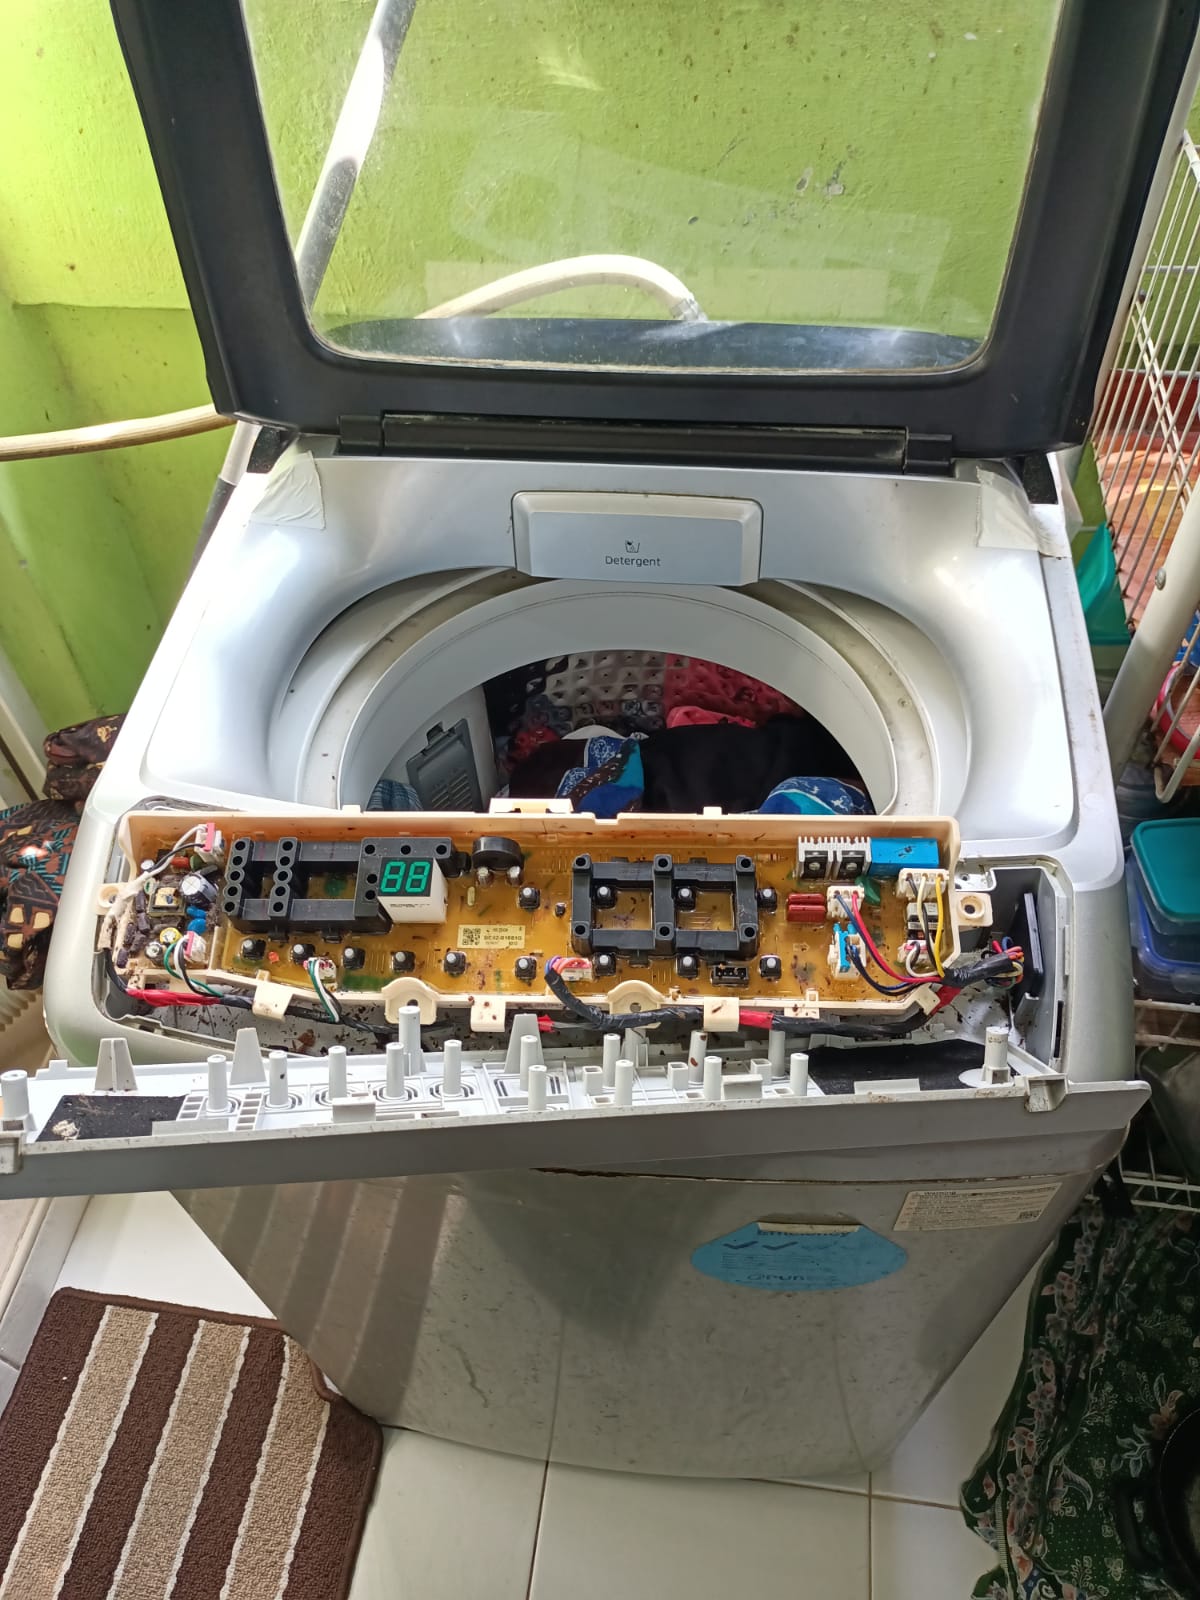 Washing Machine Checking For Control Panel Issue 16